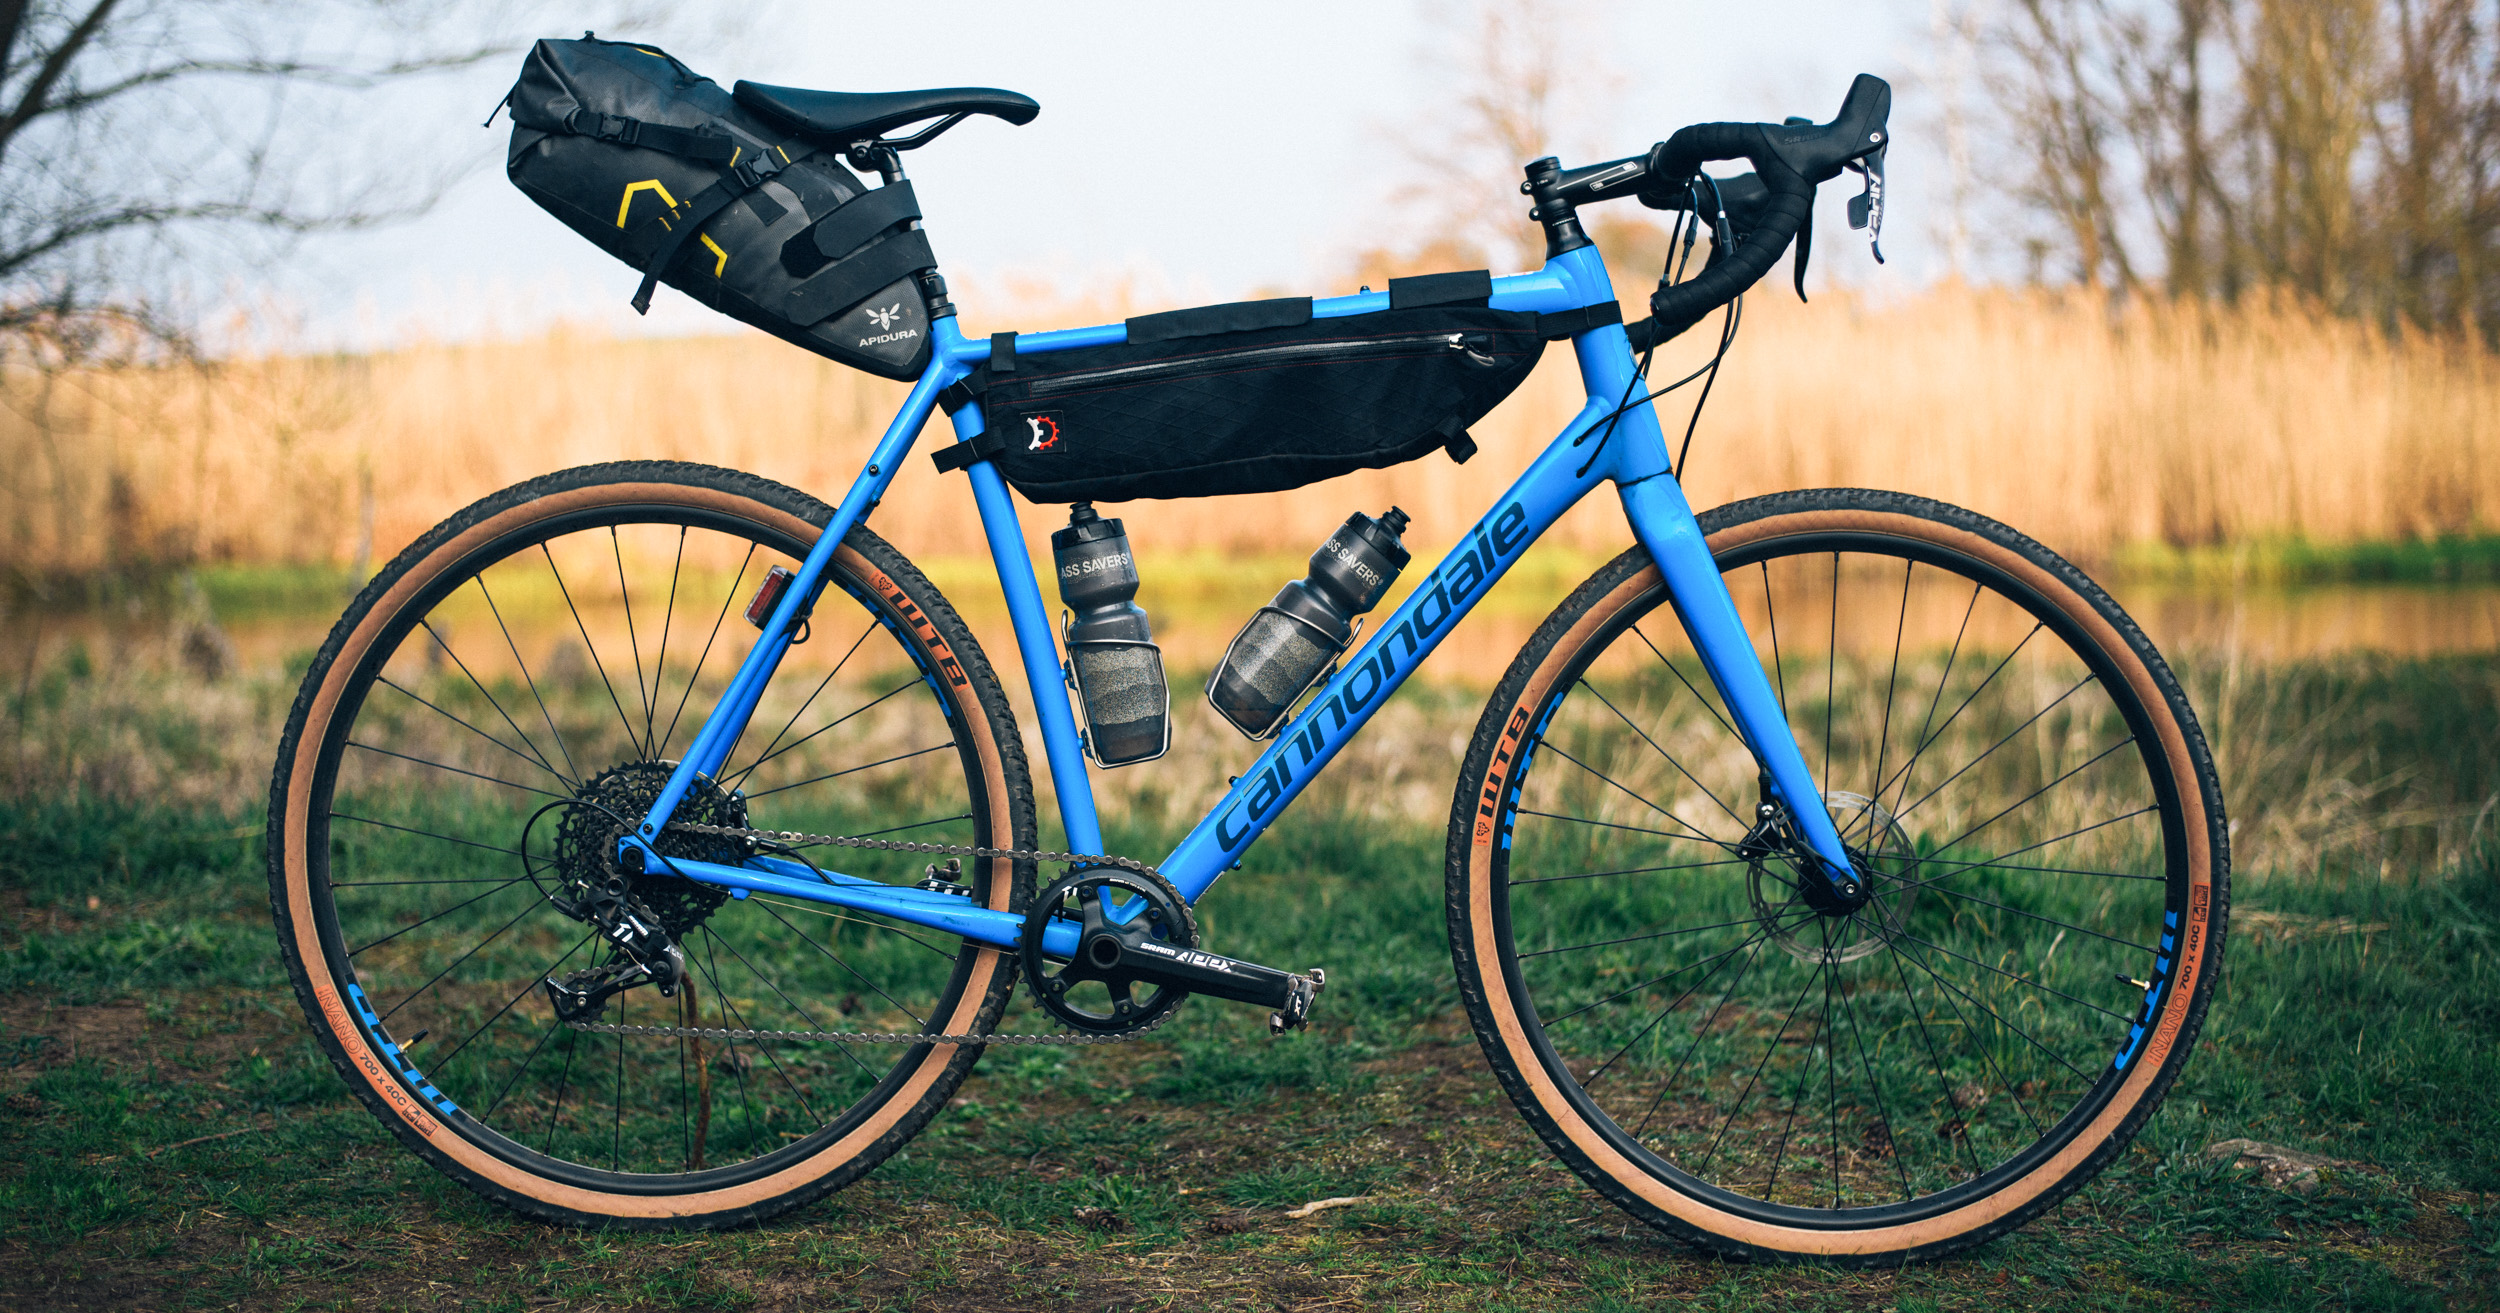 Cannondale Topstone Apex 1 Review: Roll 